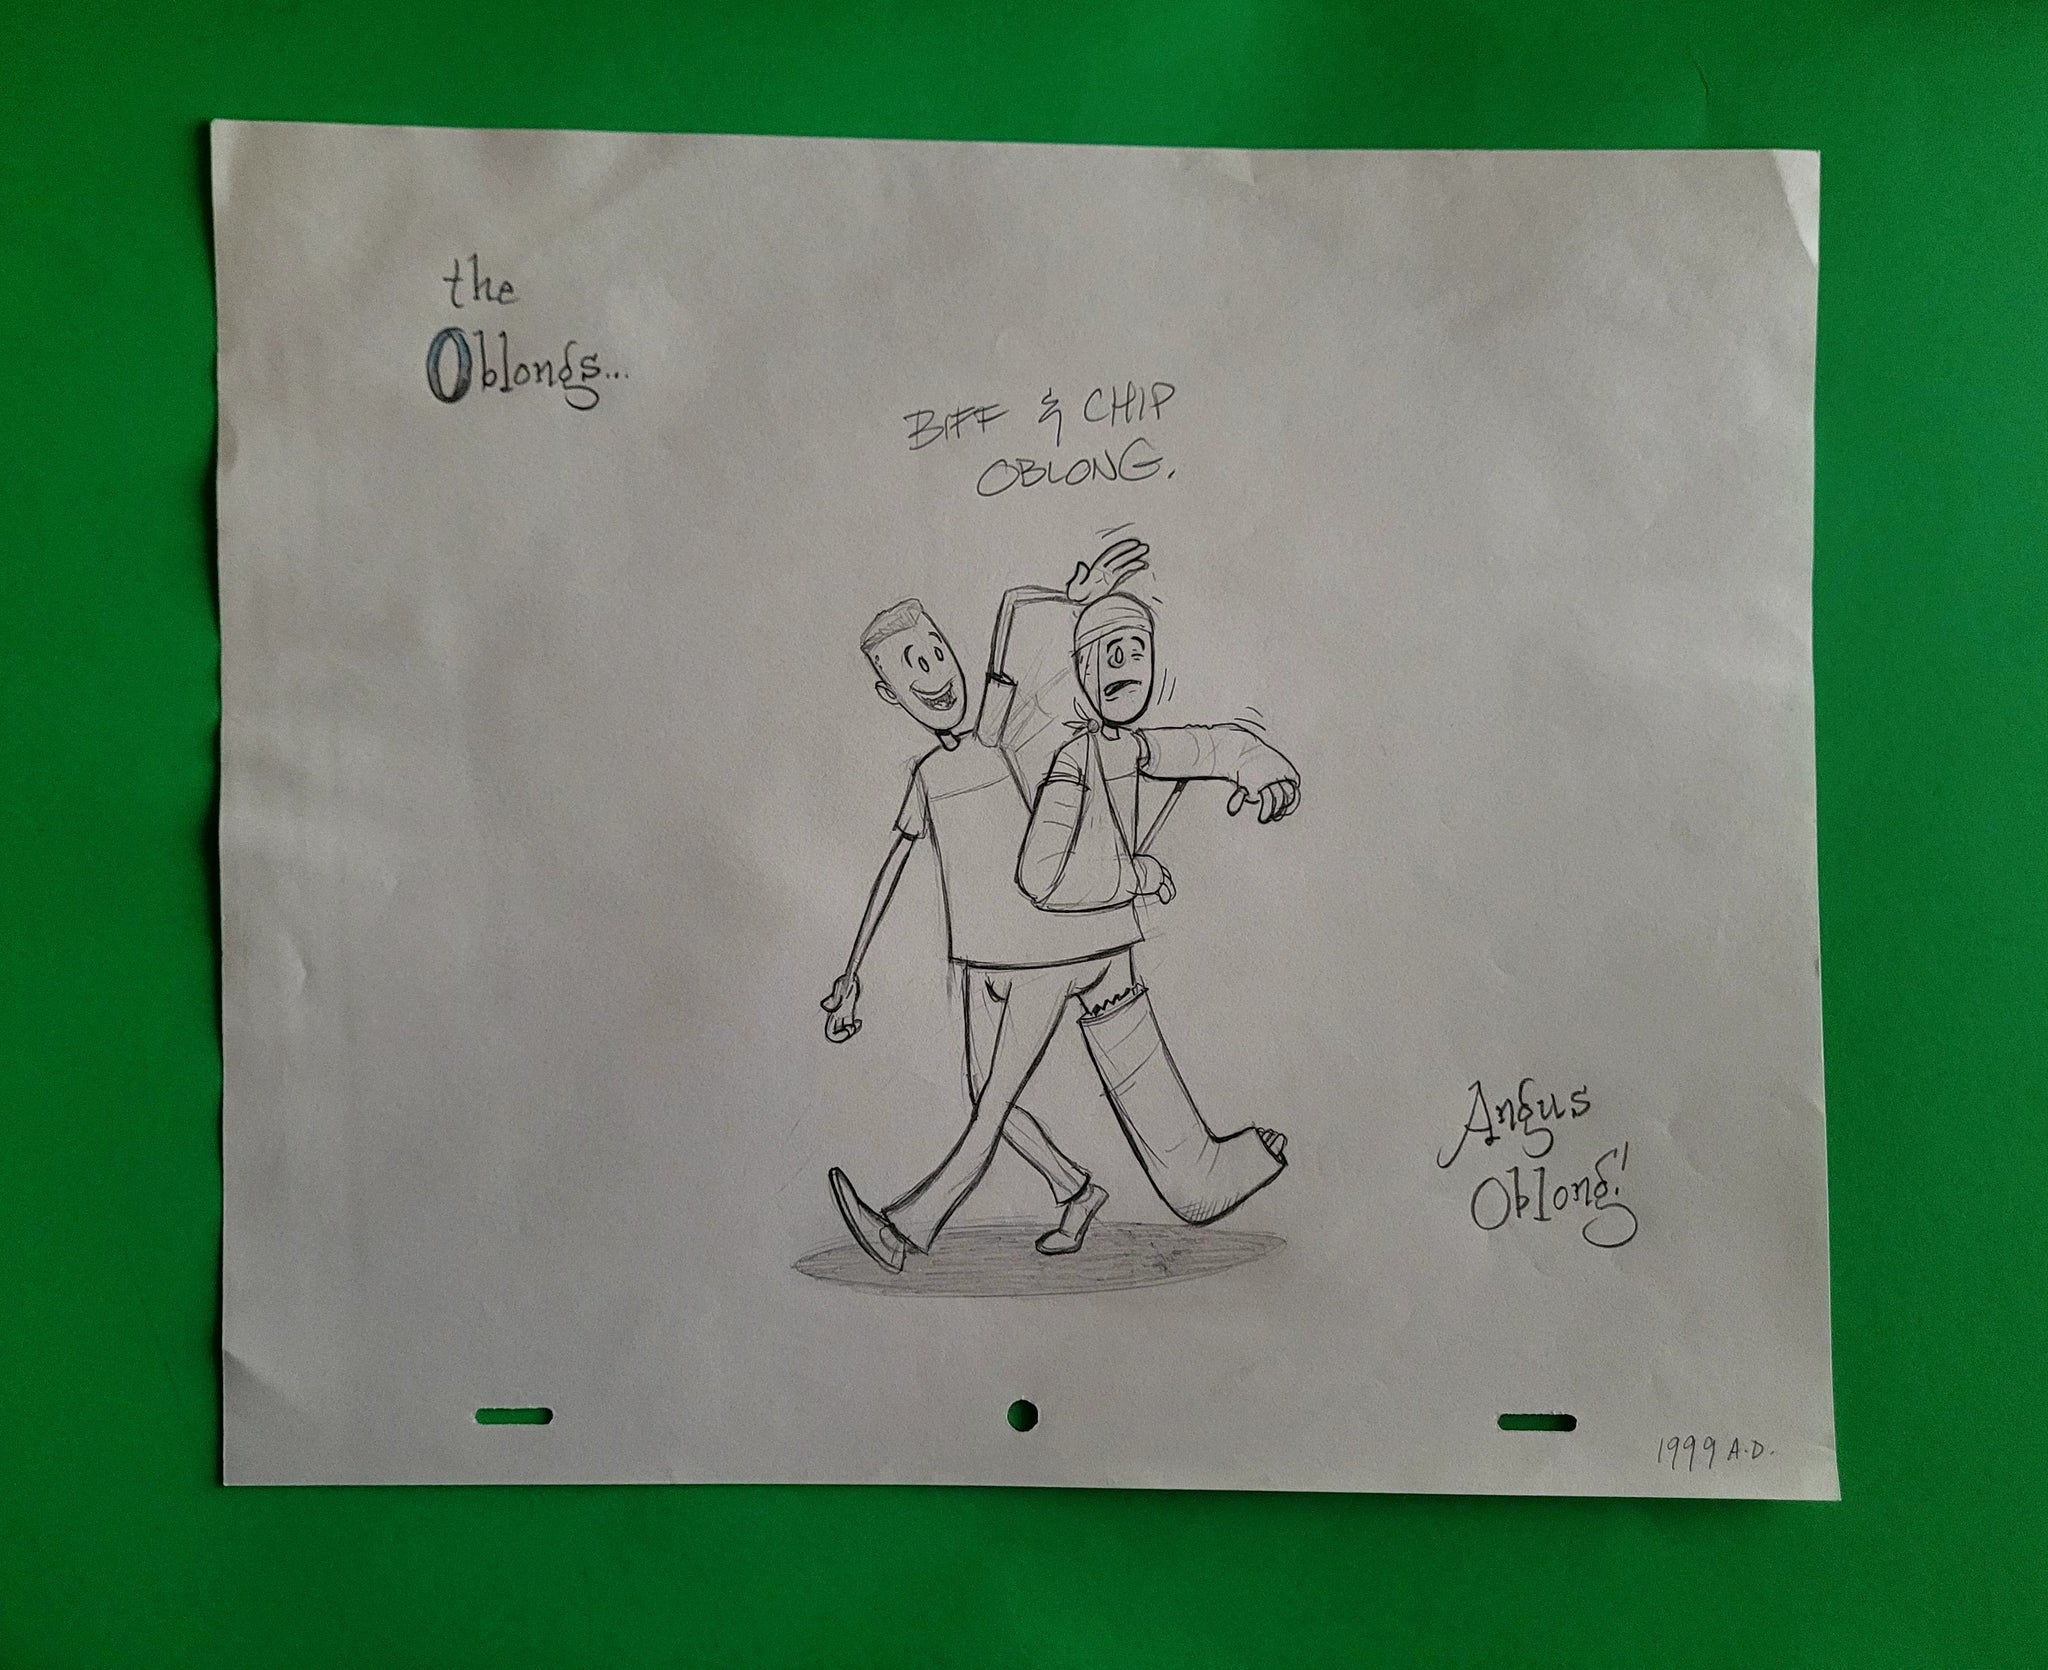 Development Art of Biff and Chip Oblong. Chip in casts.